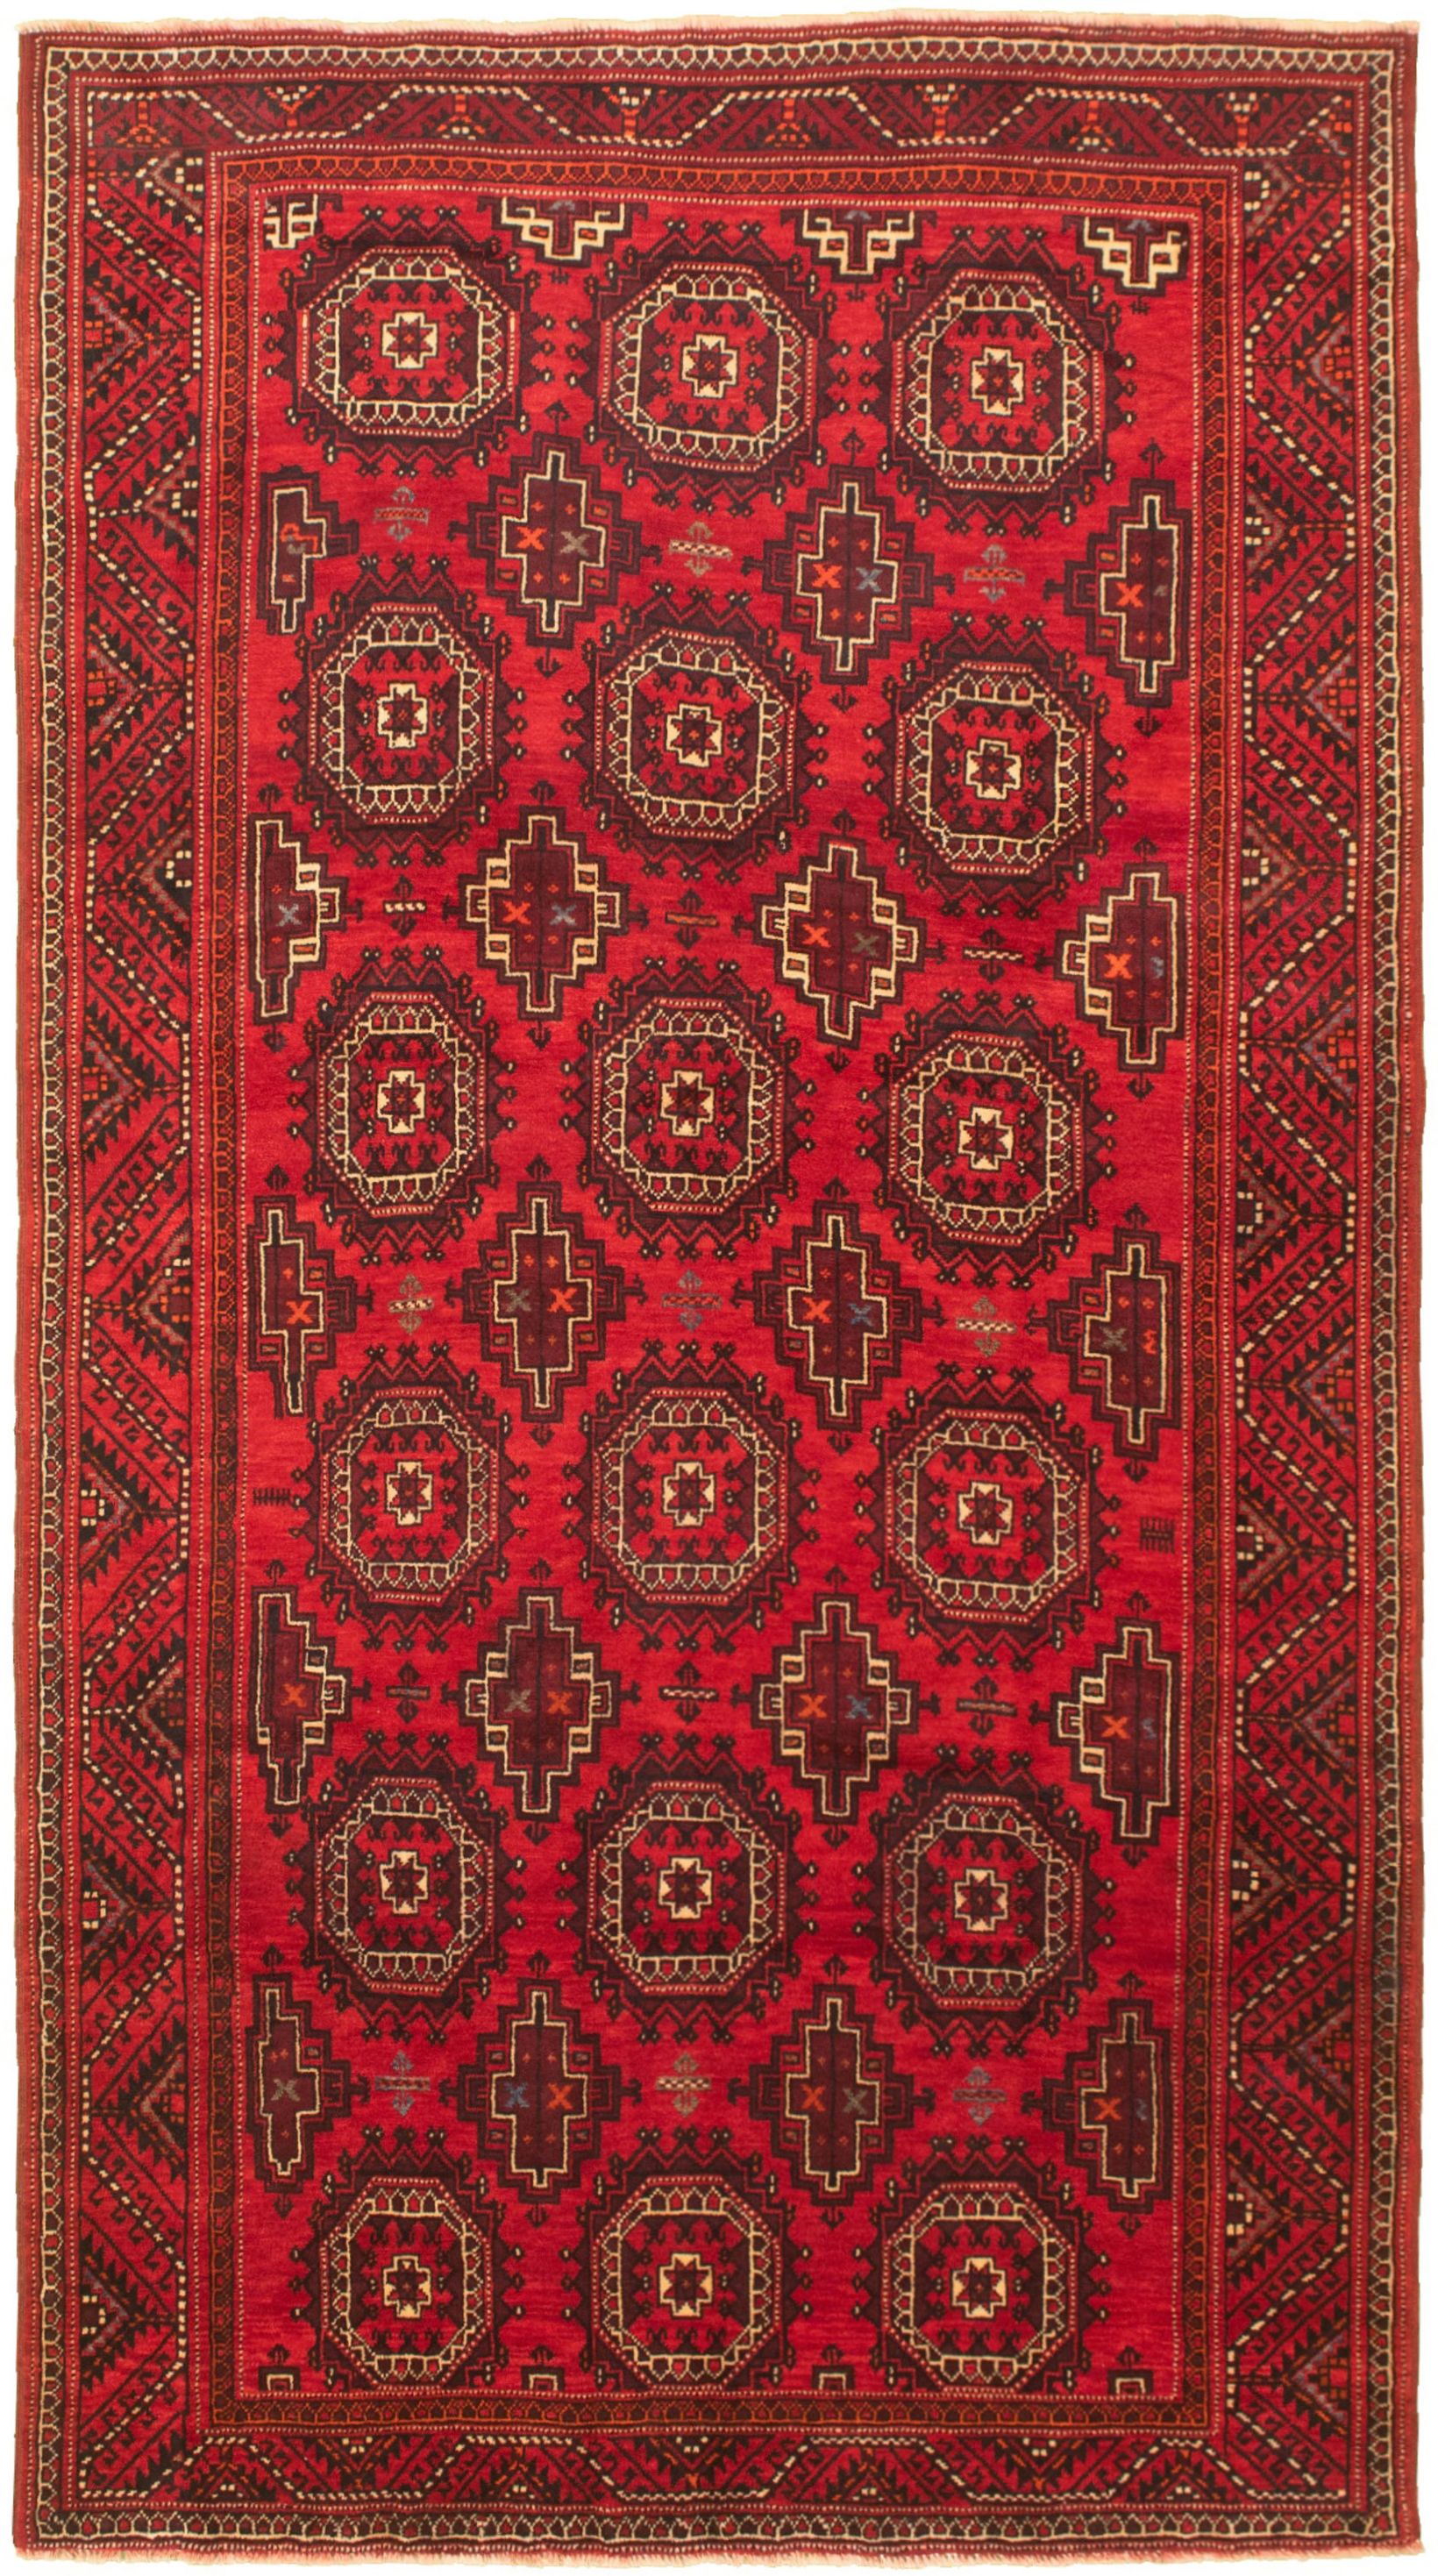 Hand-knotted Caucasus Kula Red Wool Rug 5'2" x 9'6"  Size: 5'2" x 9'6"  